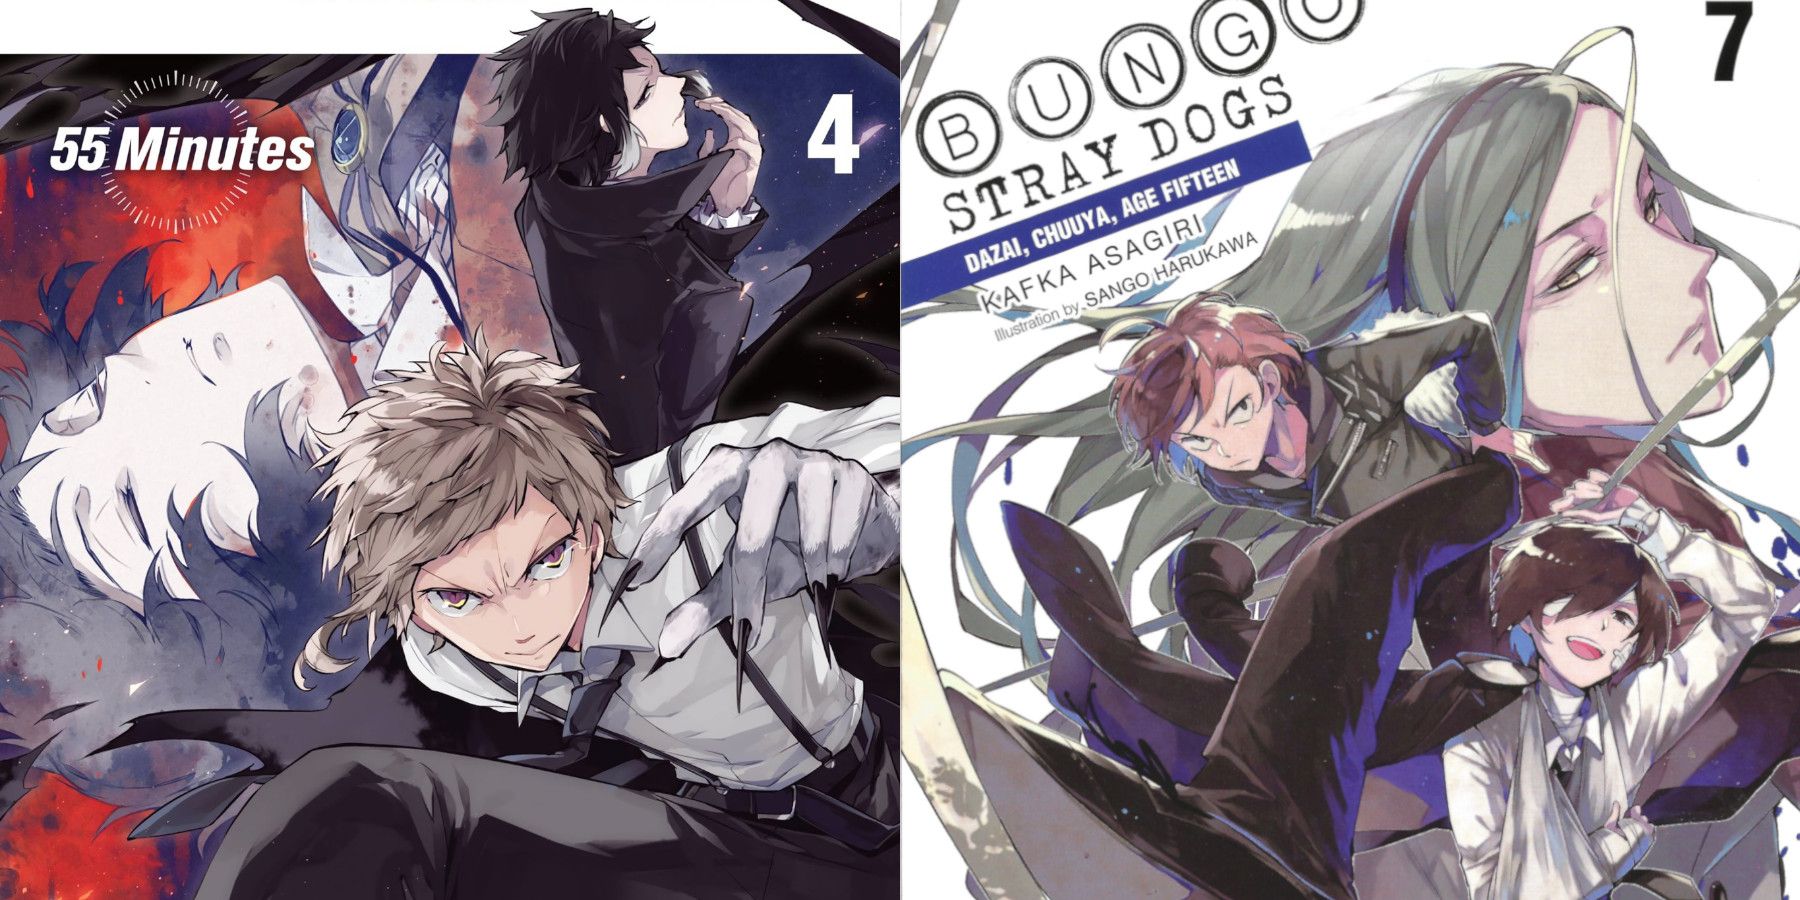 Bungo Stray Dogs: How To Read The Manga After Season 4